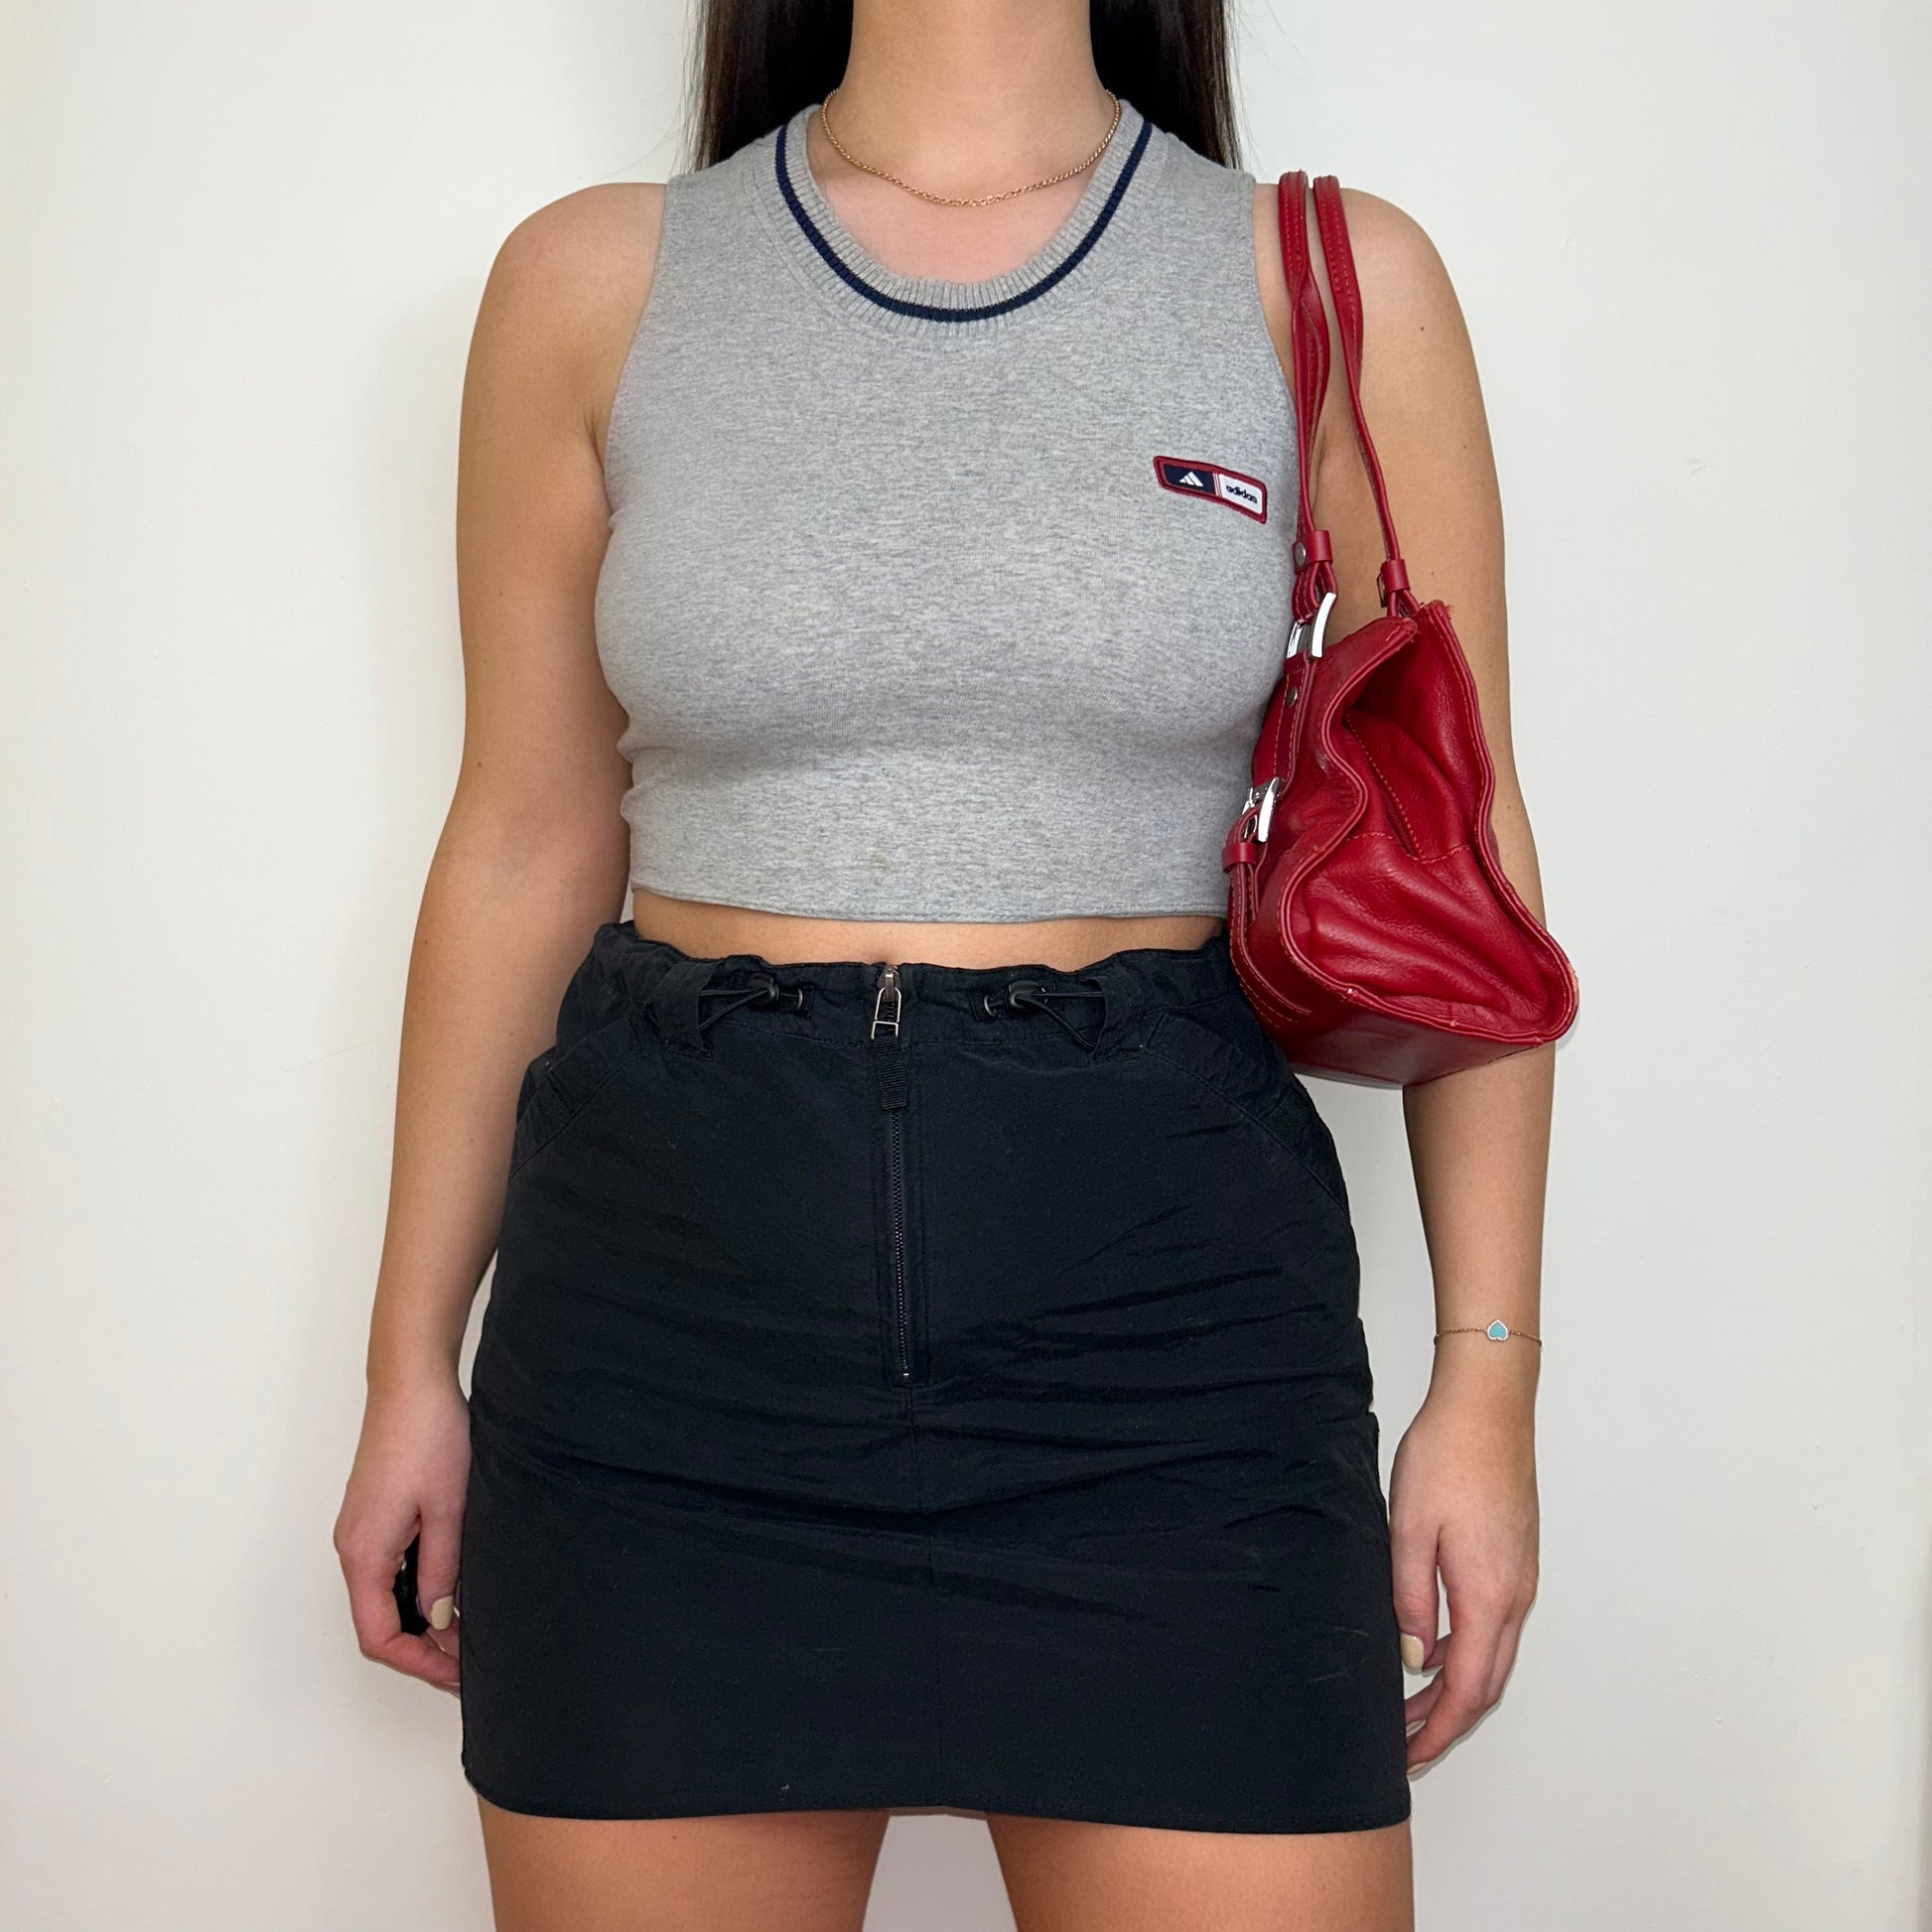 grey sleeveless crop top with small adidas logo shown on a model wearing a black mini skirt and red shoulder bag